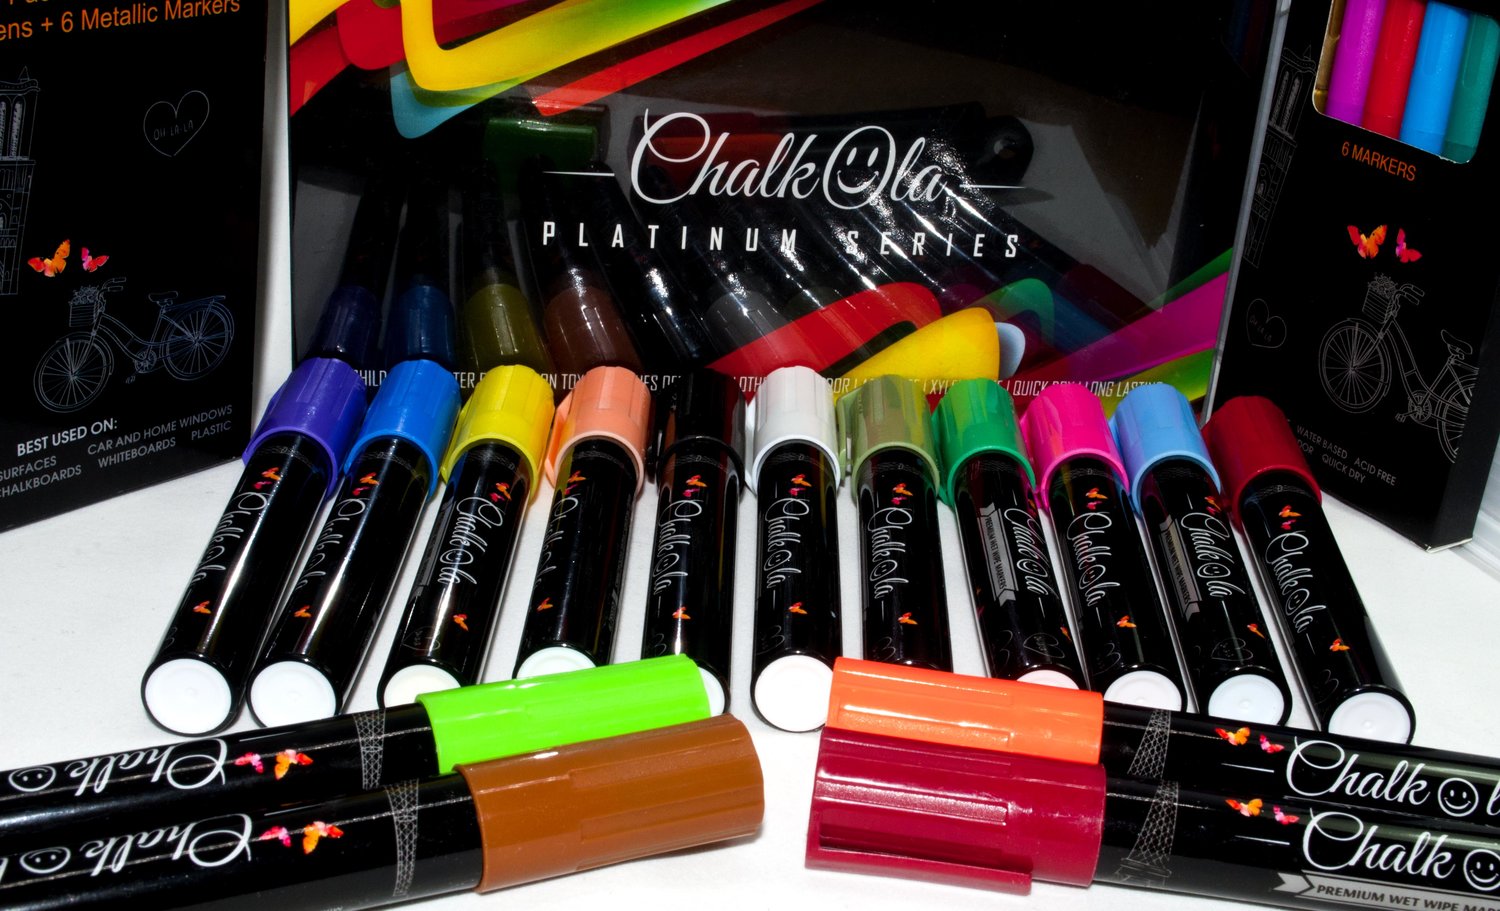 How To Use Chalkola Chalk Markers [Tutorial] 